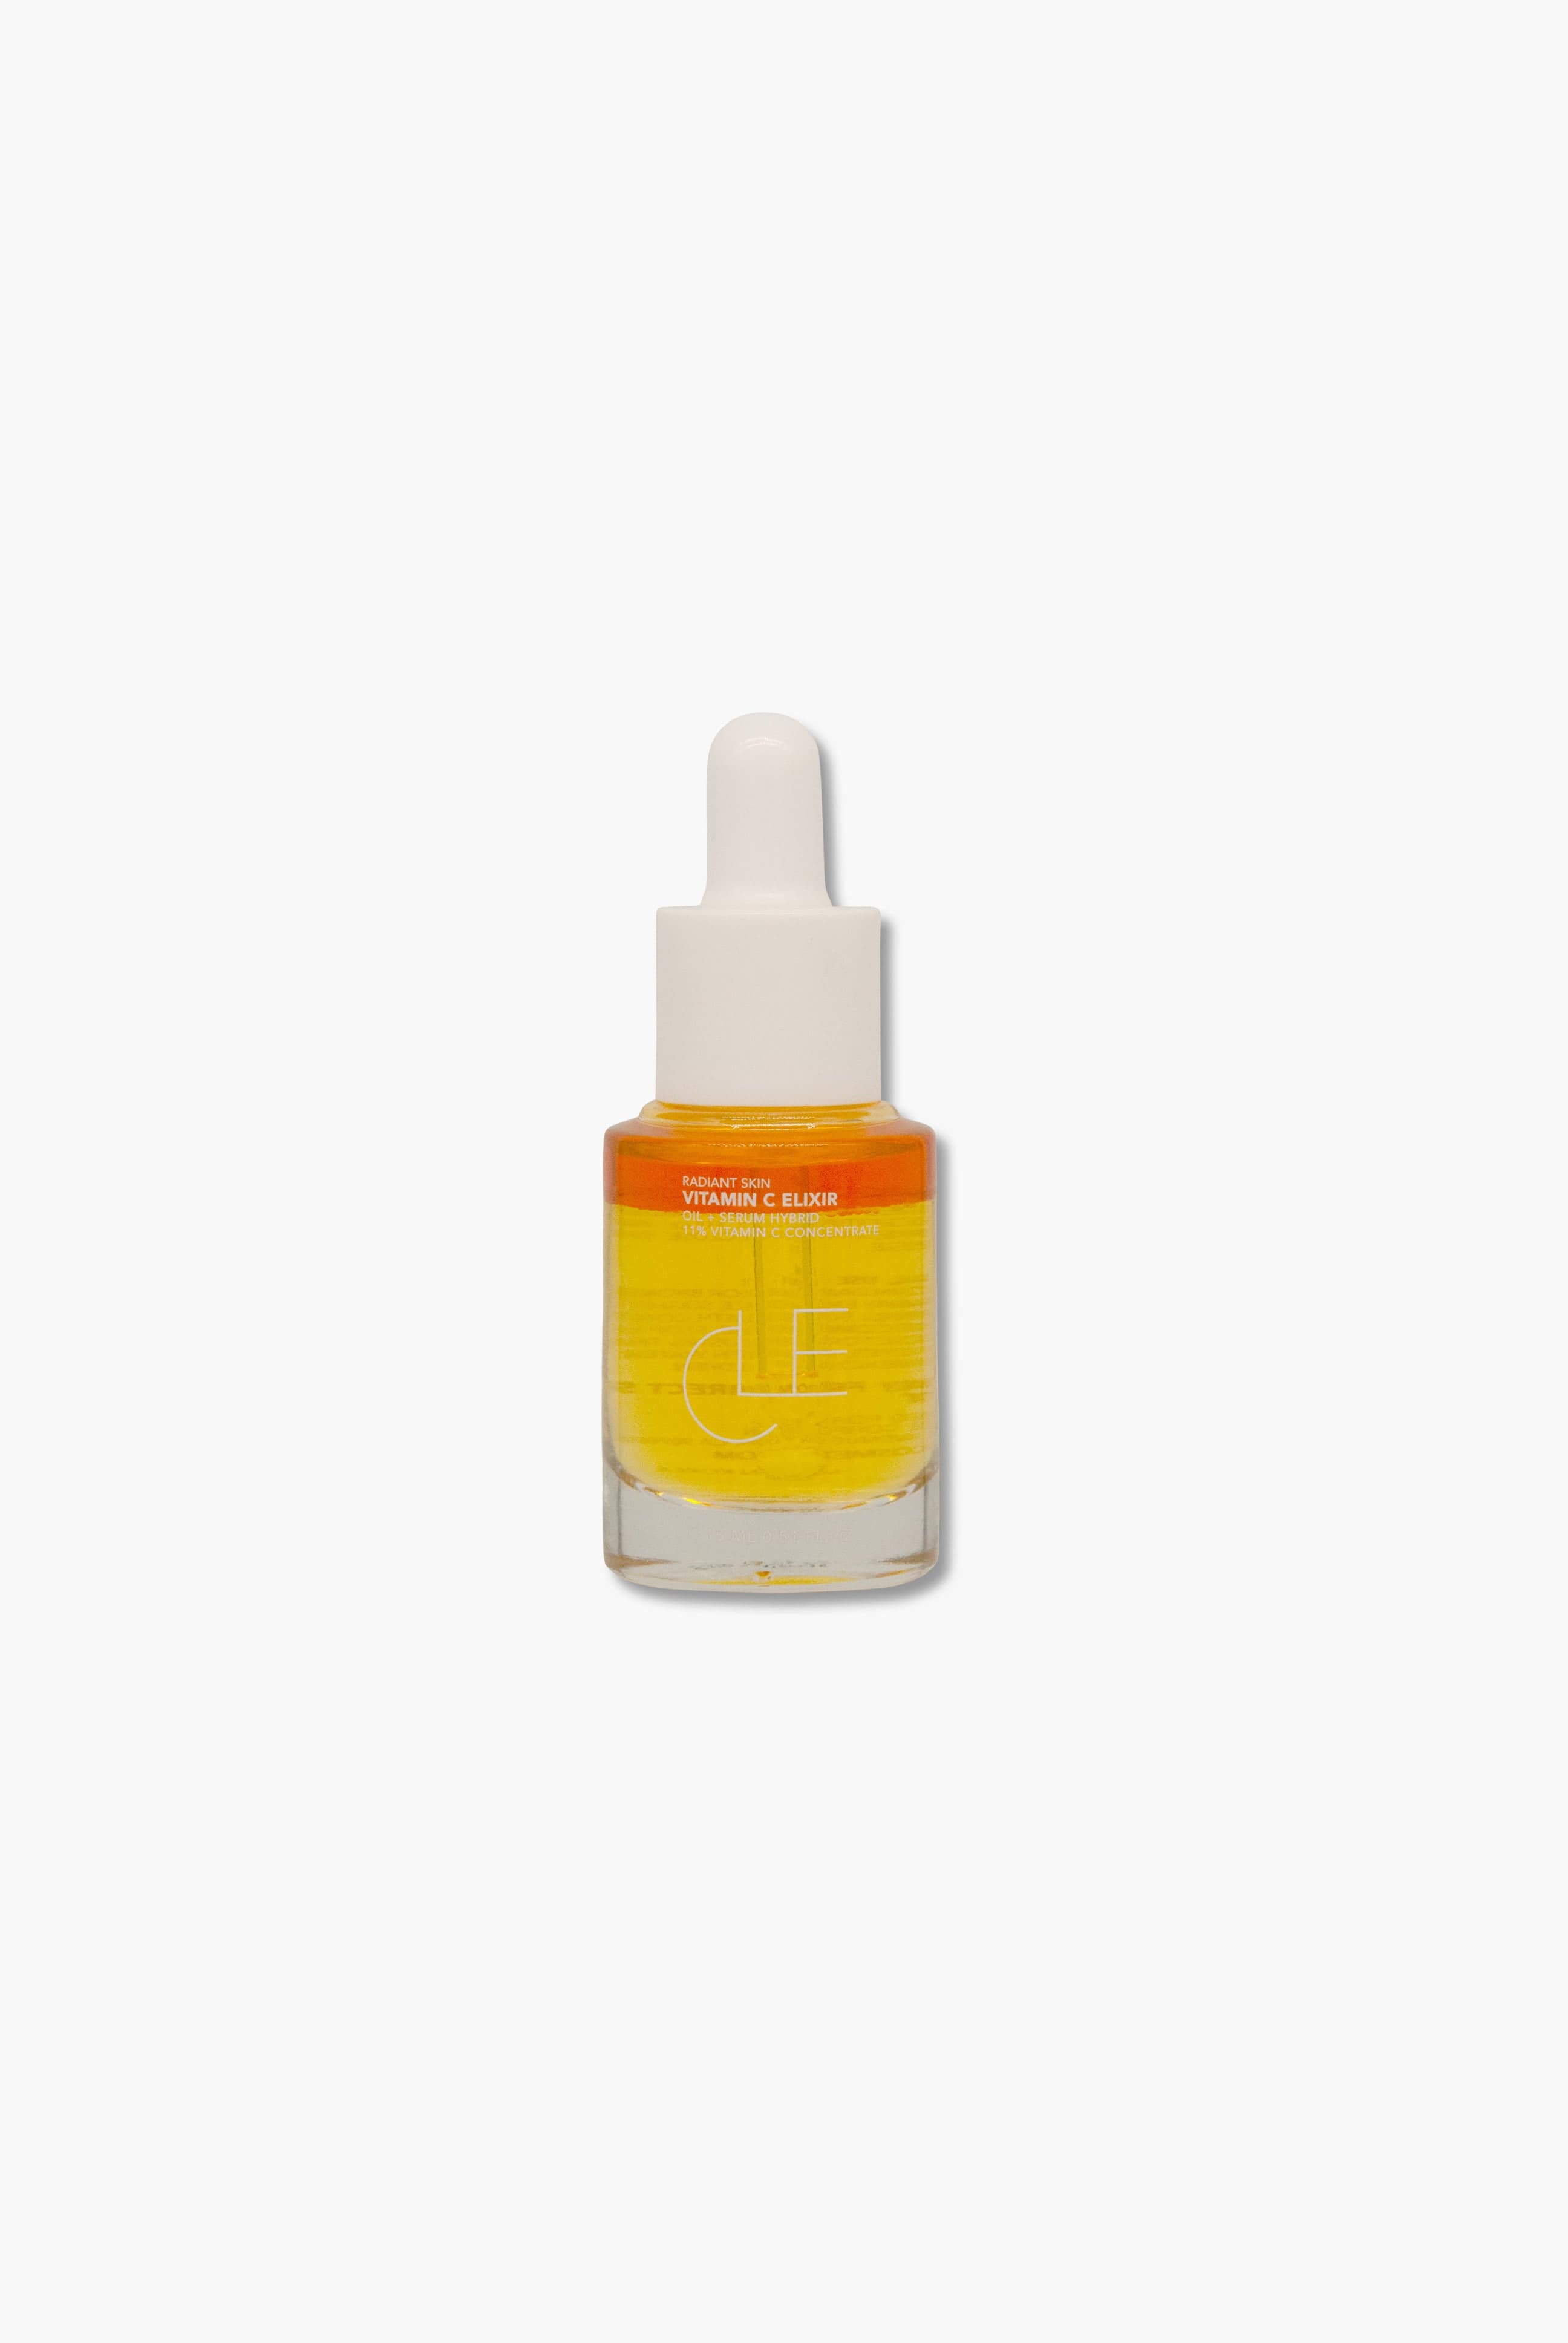 A vial of Vitamin C Elixir against a white background.